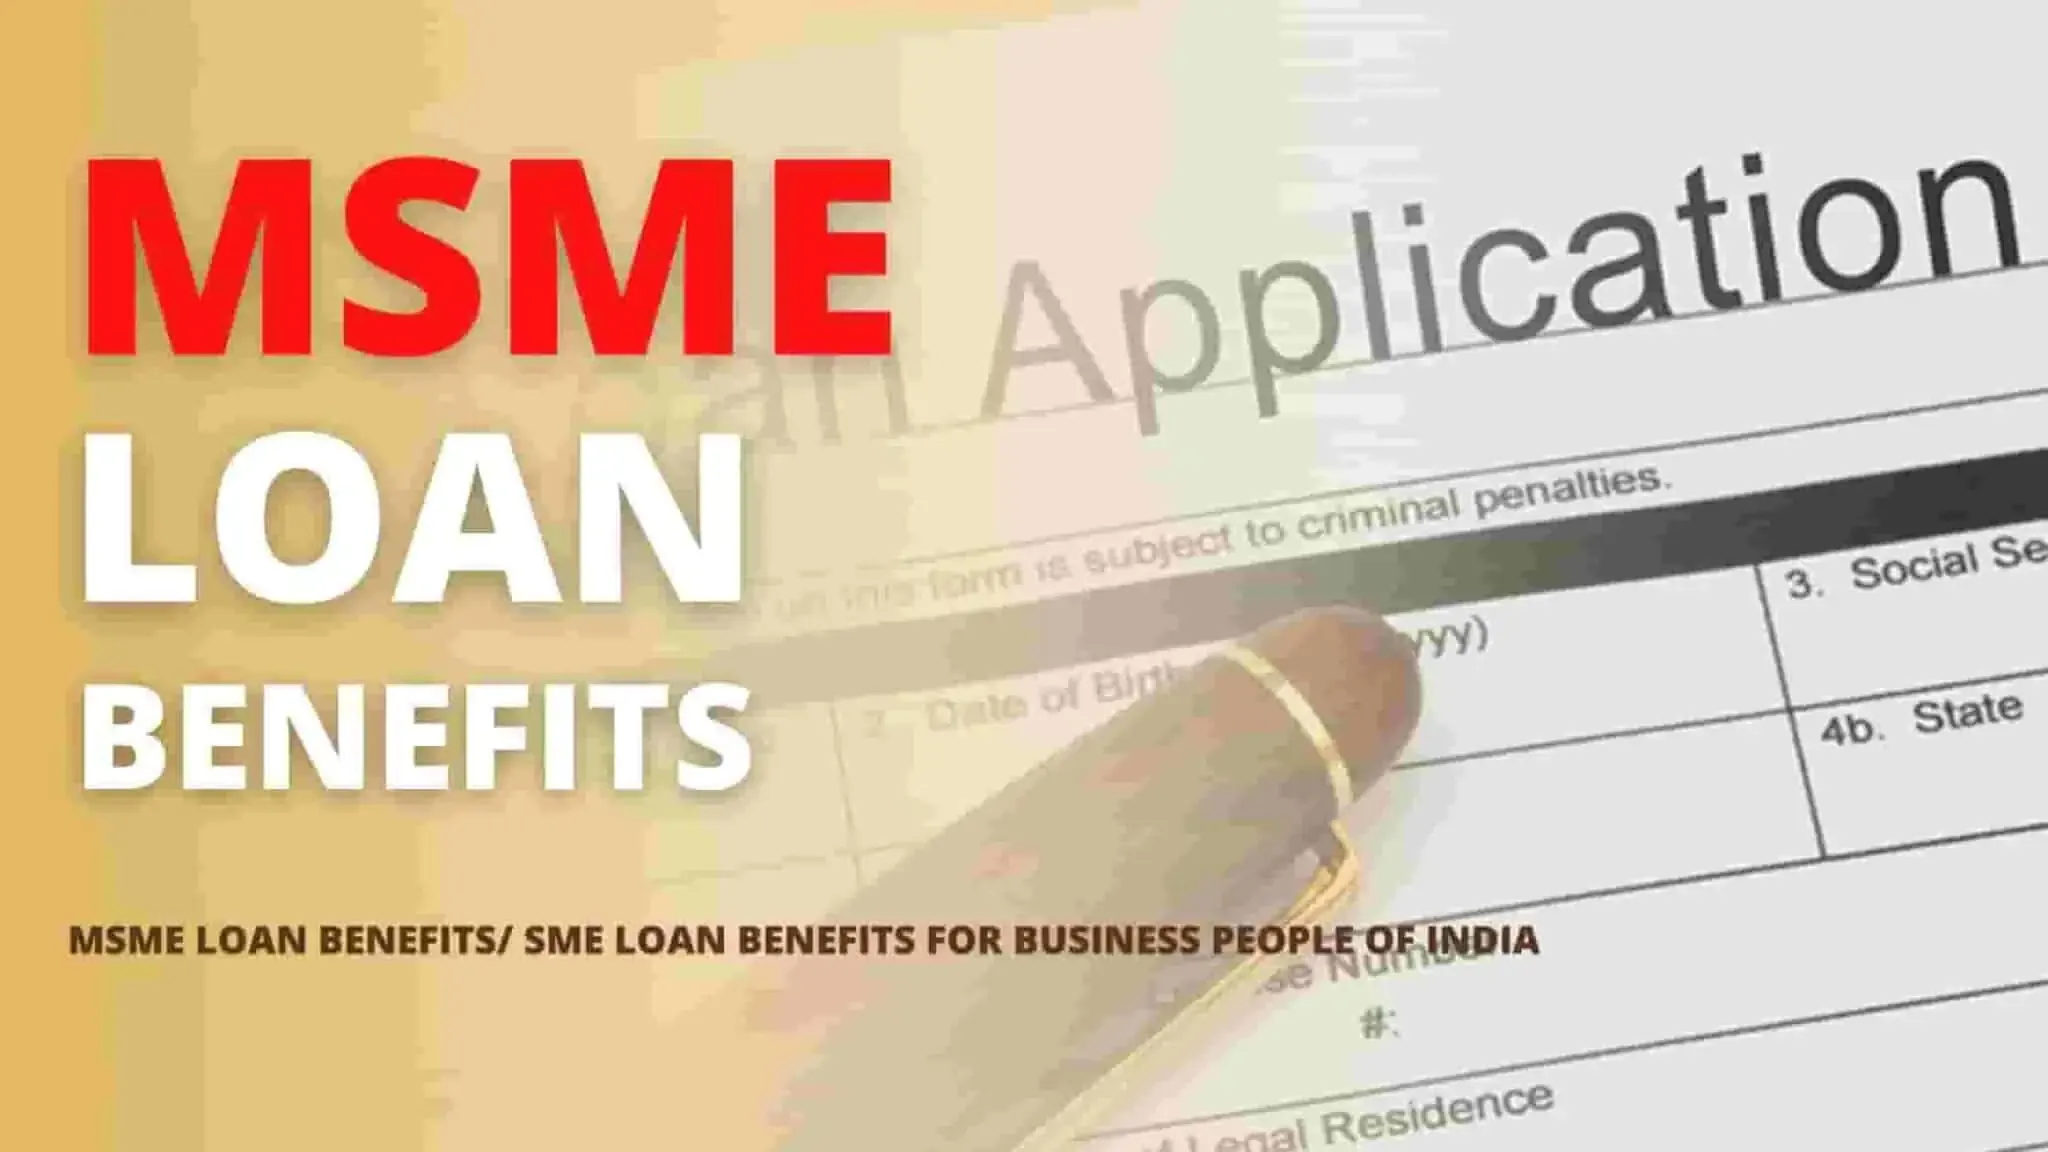 Union Bank of India Loan for MSME Application Form PDF